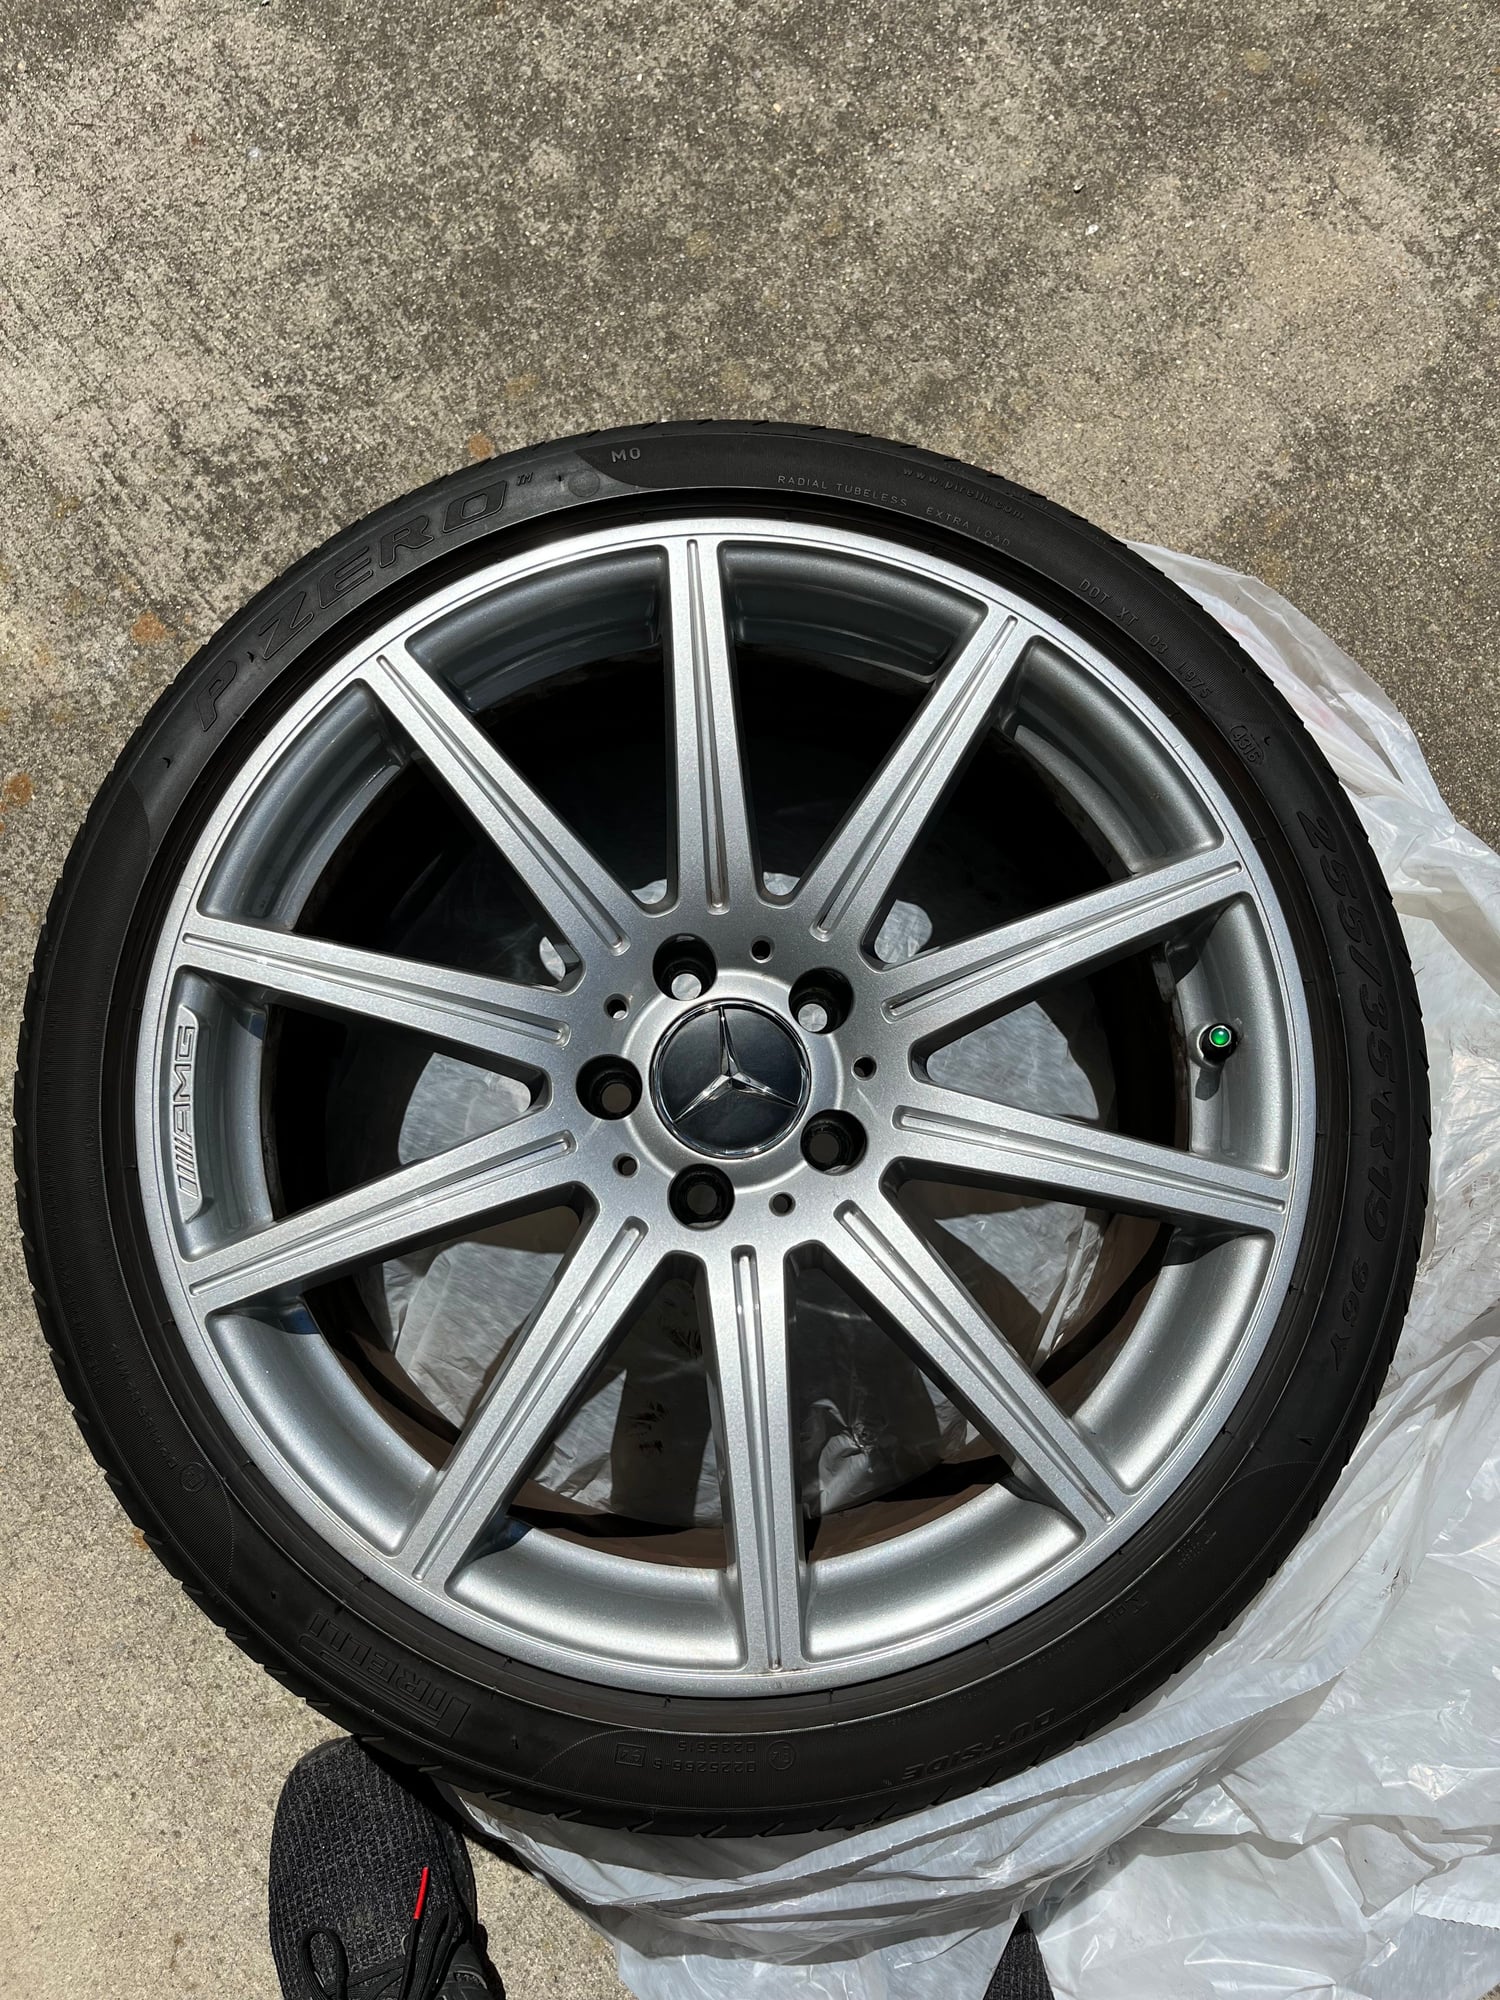 Wheels and Tires/Axles - AMG wheels came off my 2014 E63 - Used - 0  All Models - Virginia Beach, VA 23464, United States